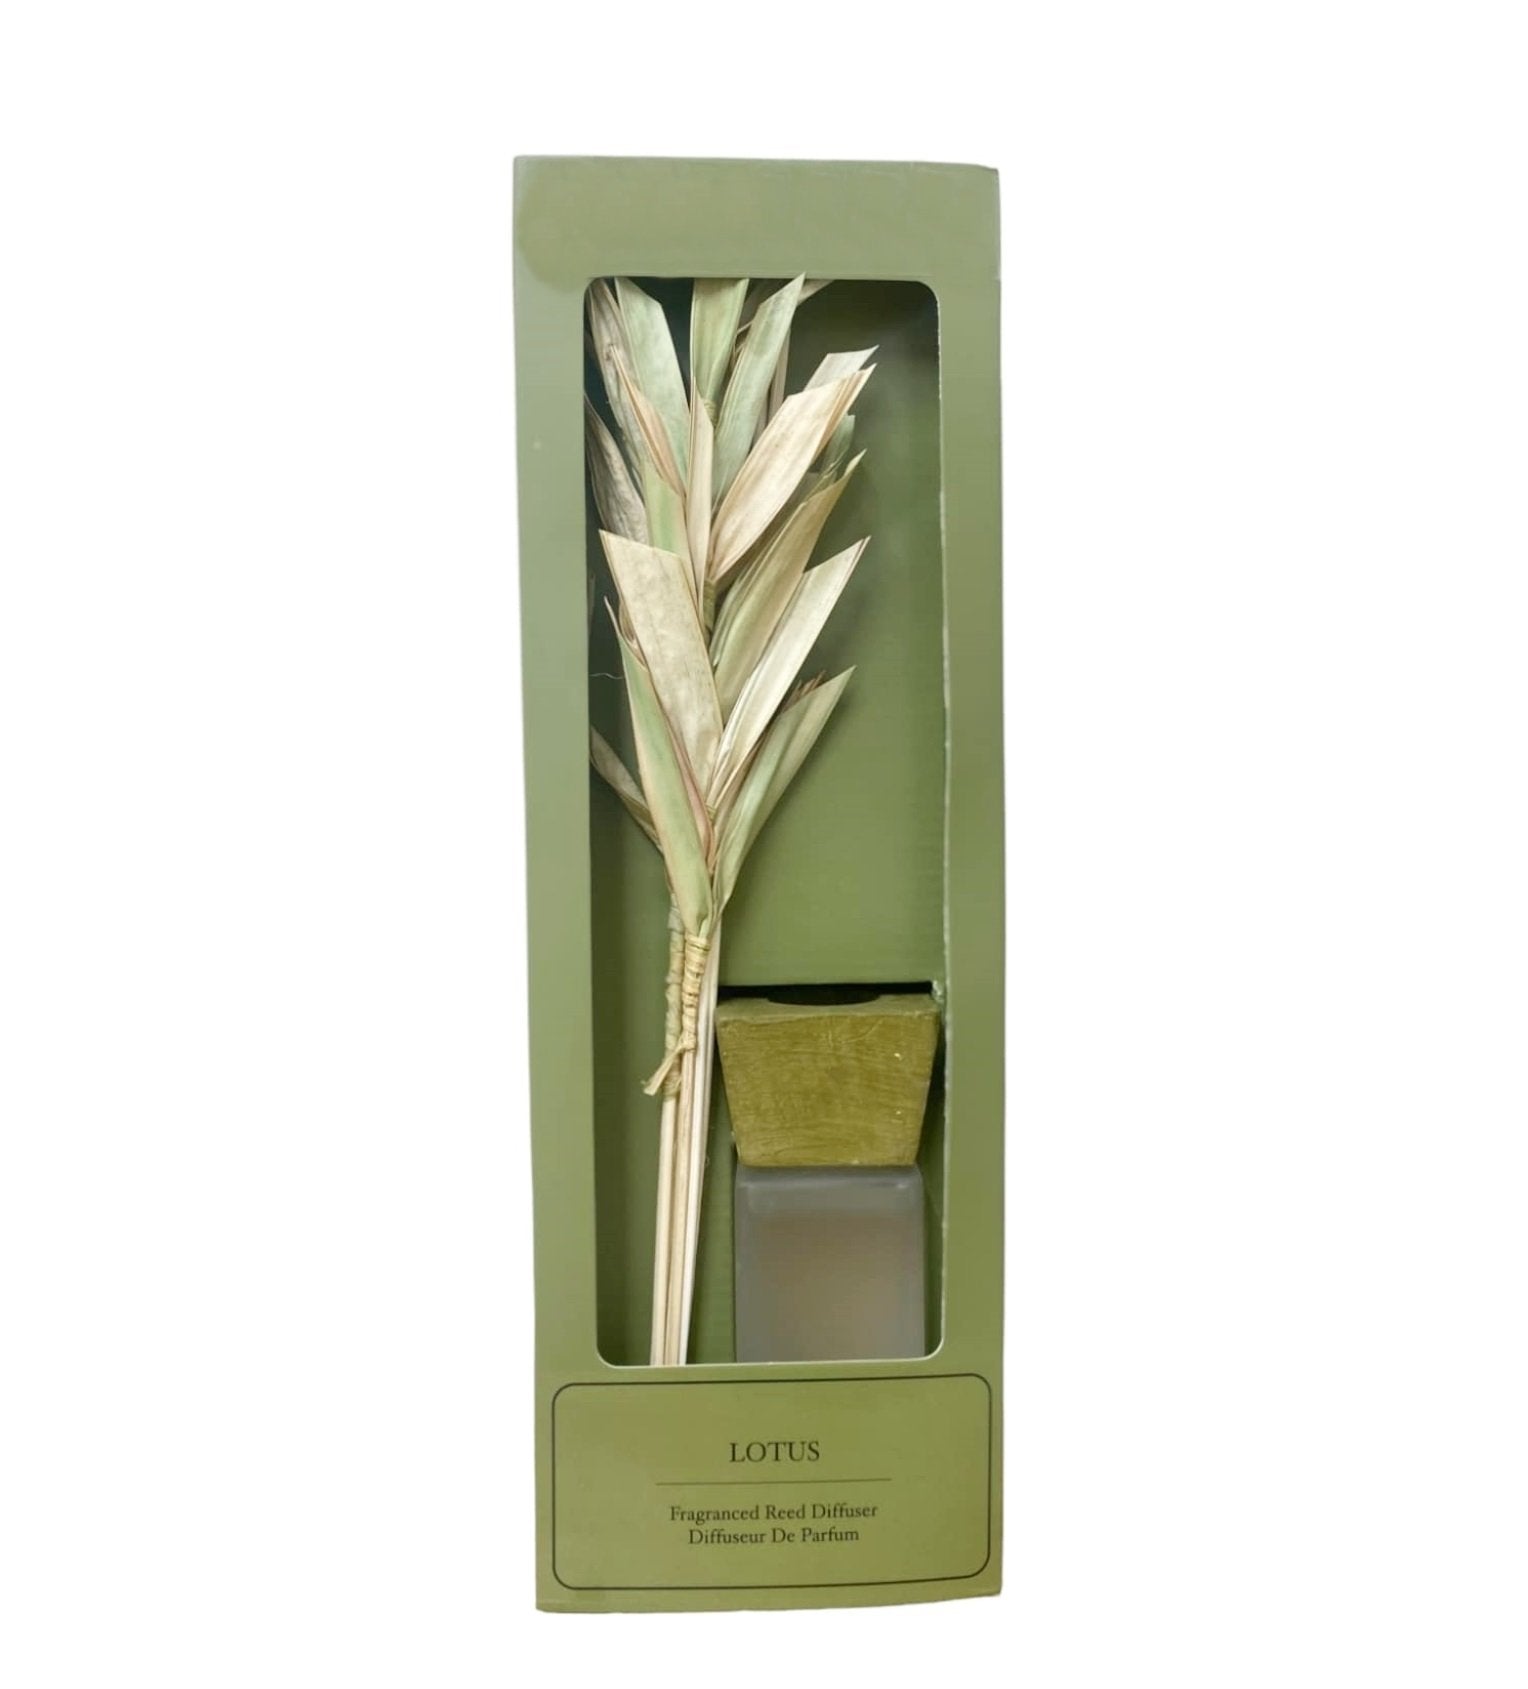 View Lotus Luxury 100ml Reed Diffuser information